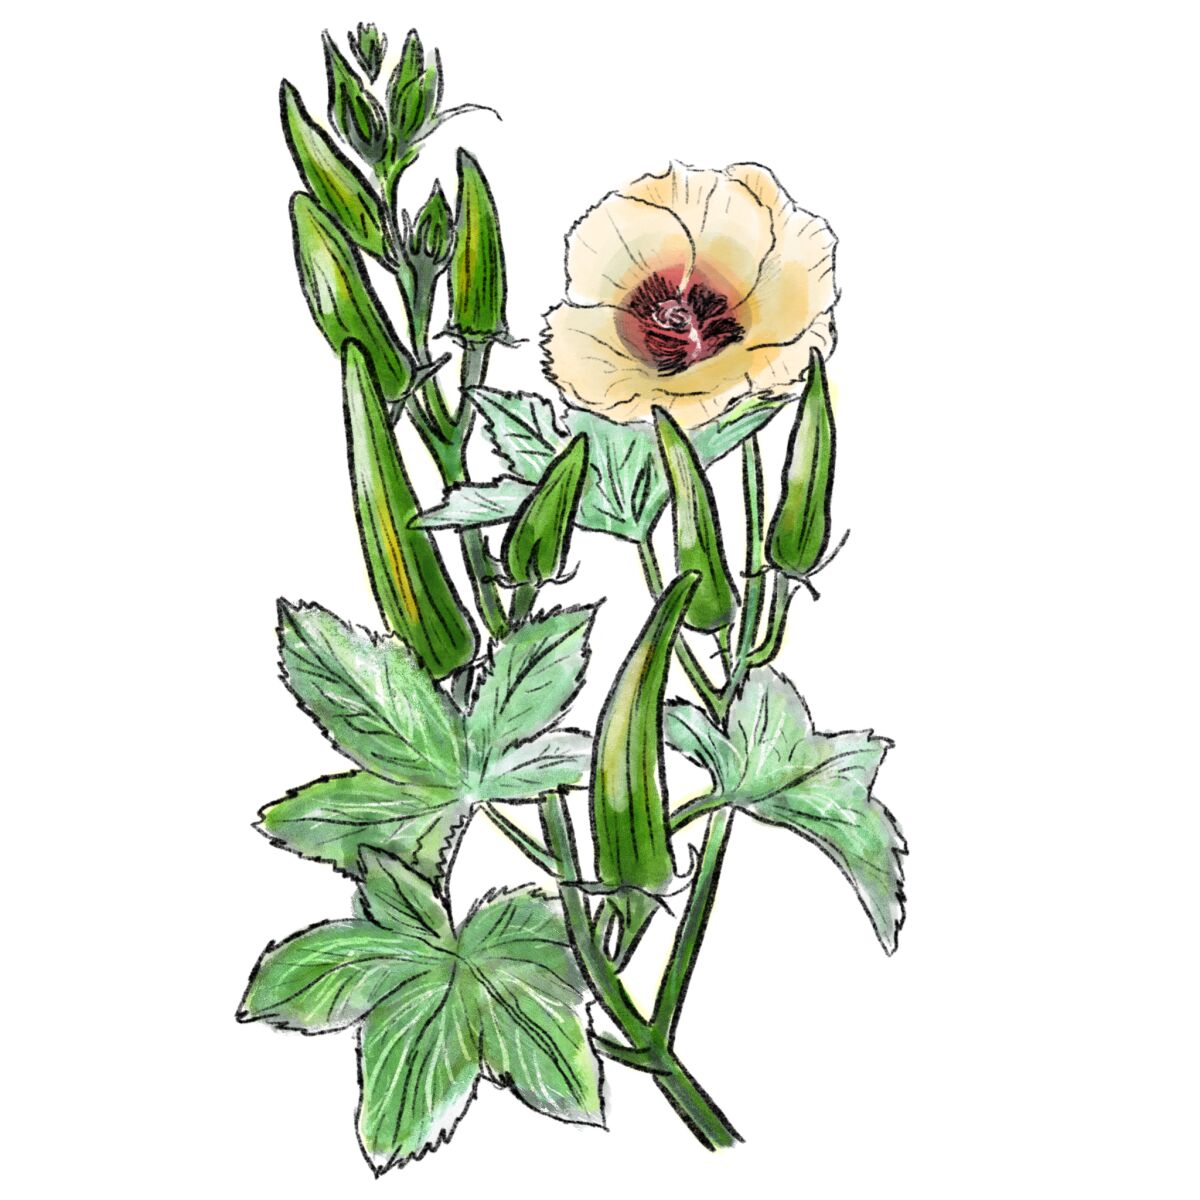 An illustration of okra growing on a plant with leaves and blooming flowers 